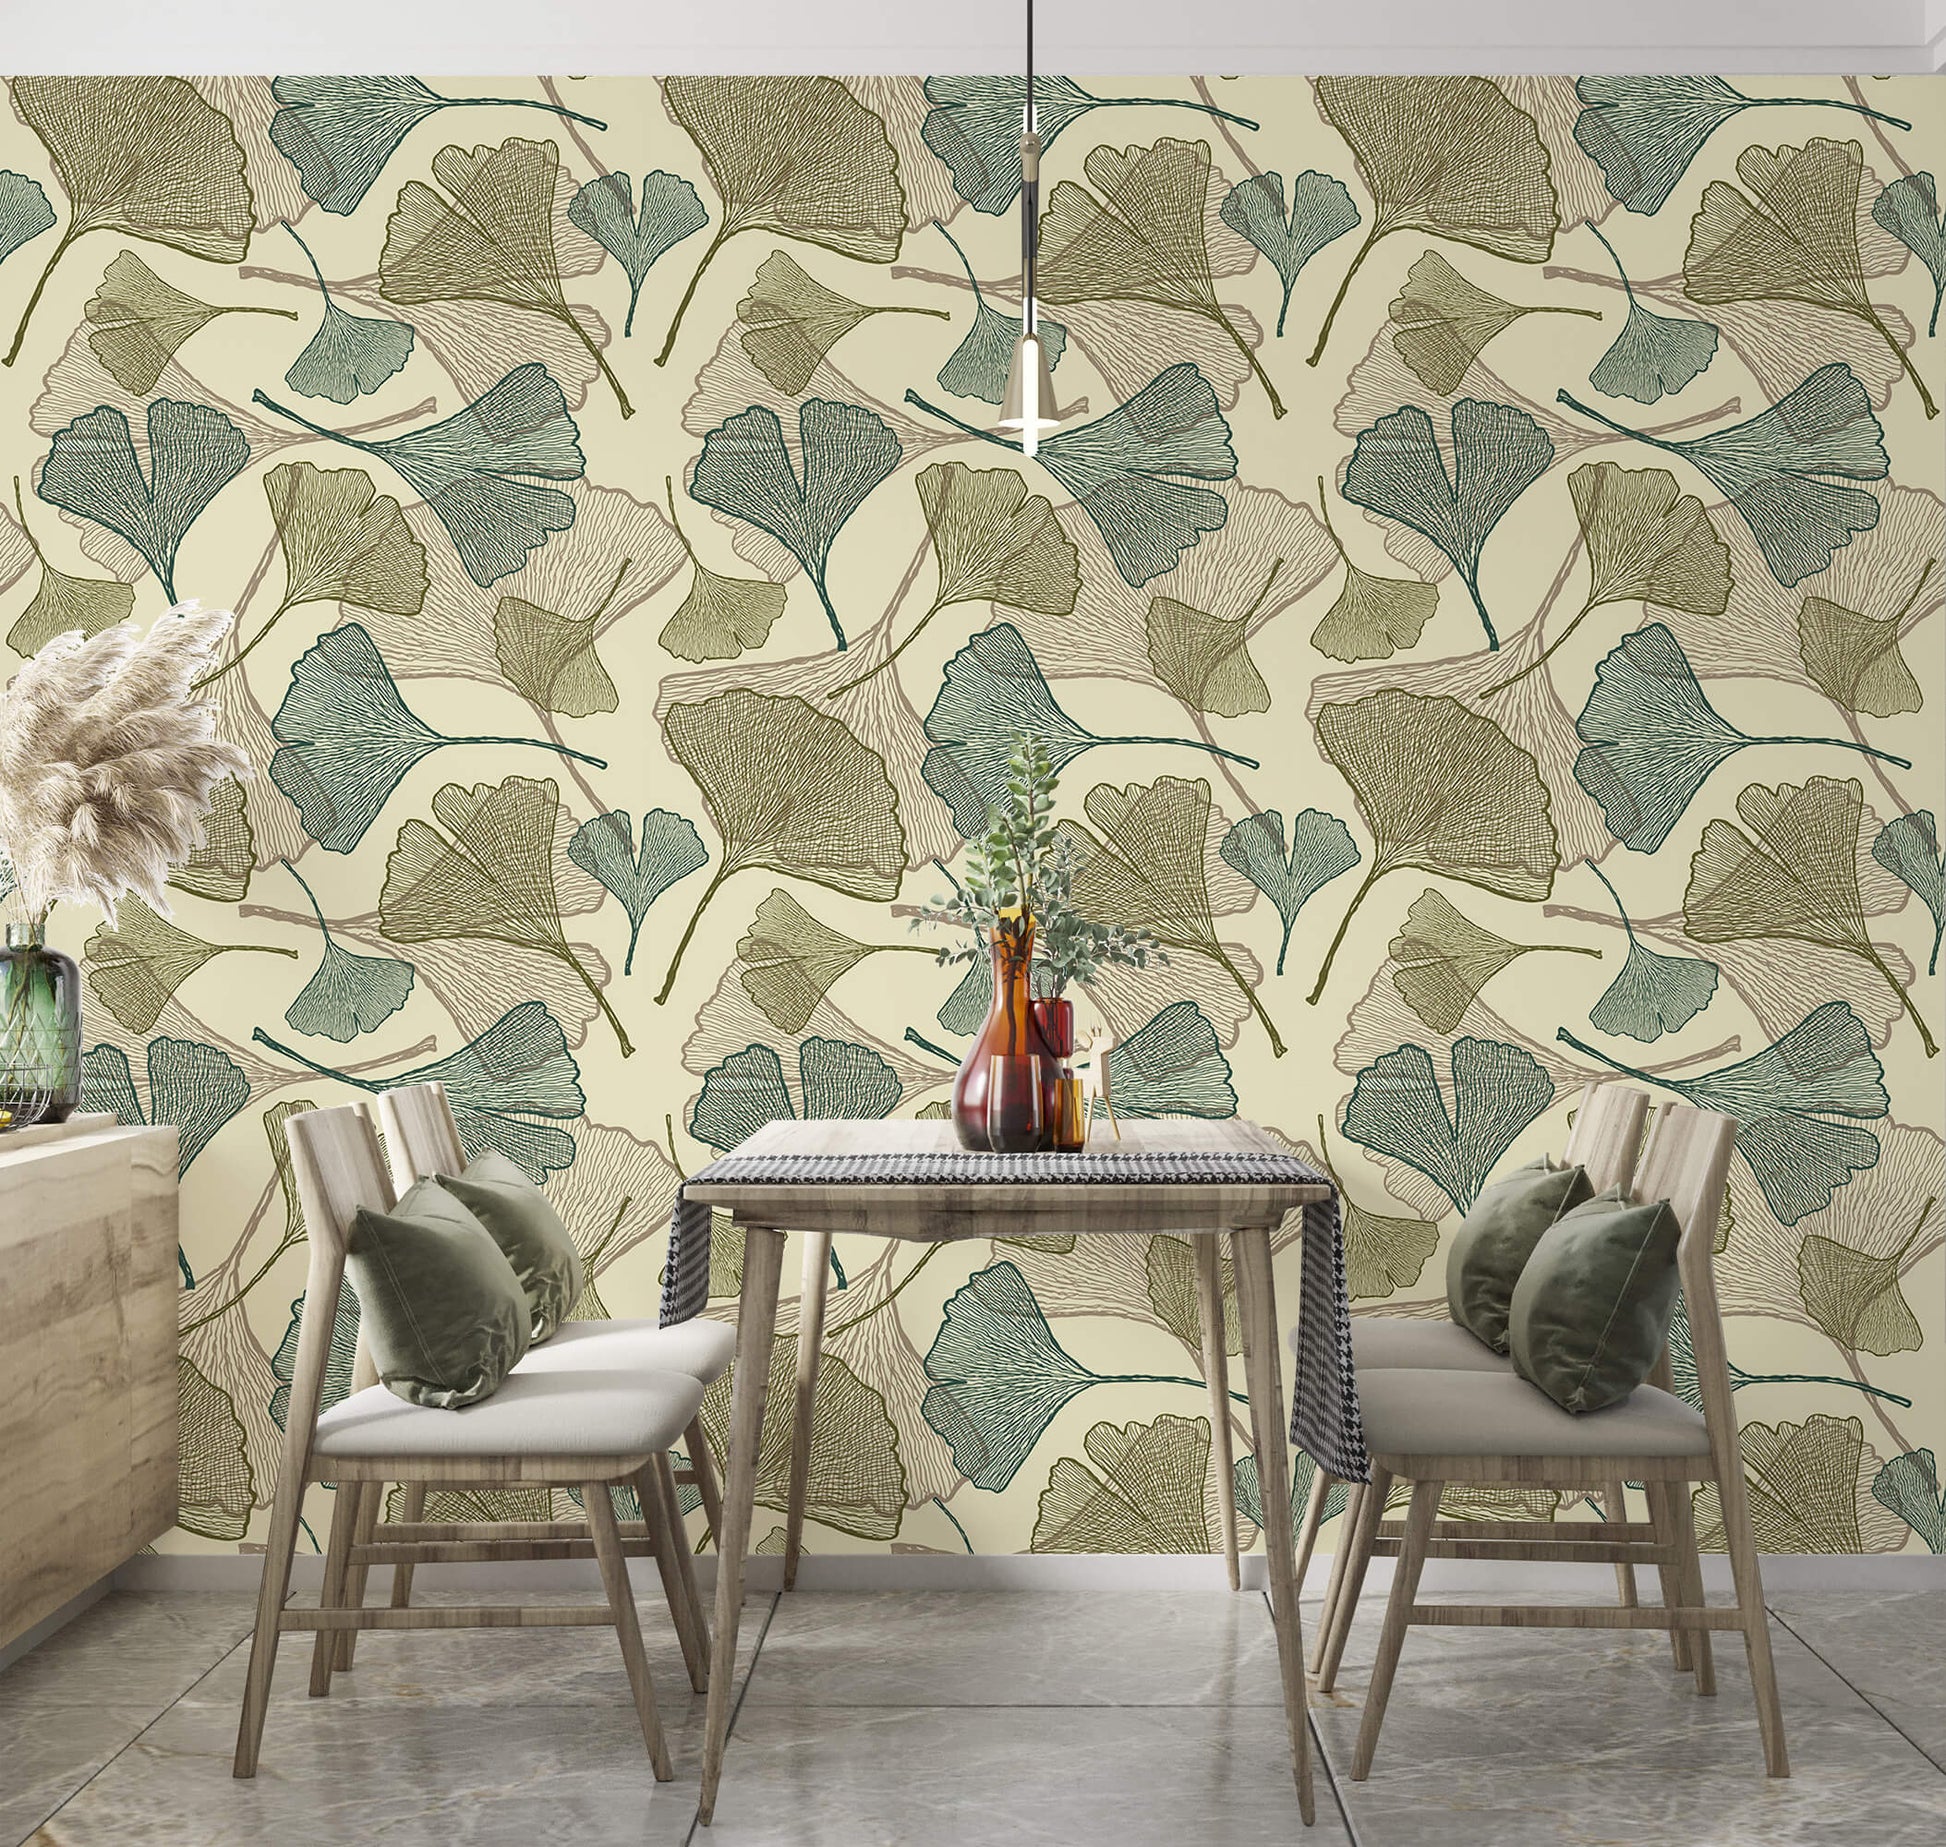 Ginkgo Serenity Wallpaper: Embrace tranquility with this elegant design, featuring delicate ginkgo leaves that exude serenity and grace, perfect for creating a peaceful ambiance in your space.